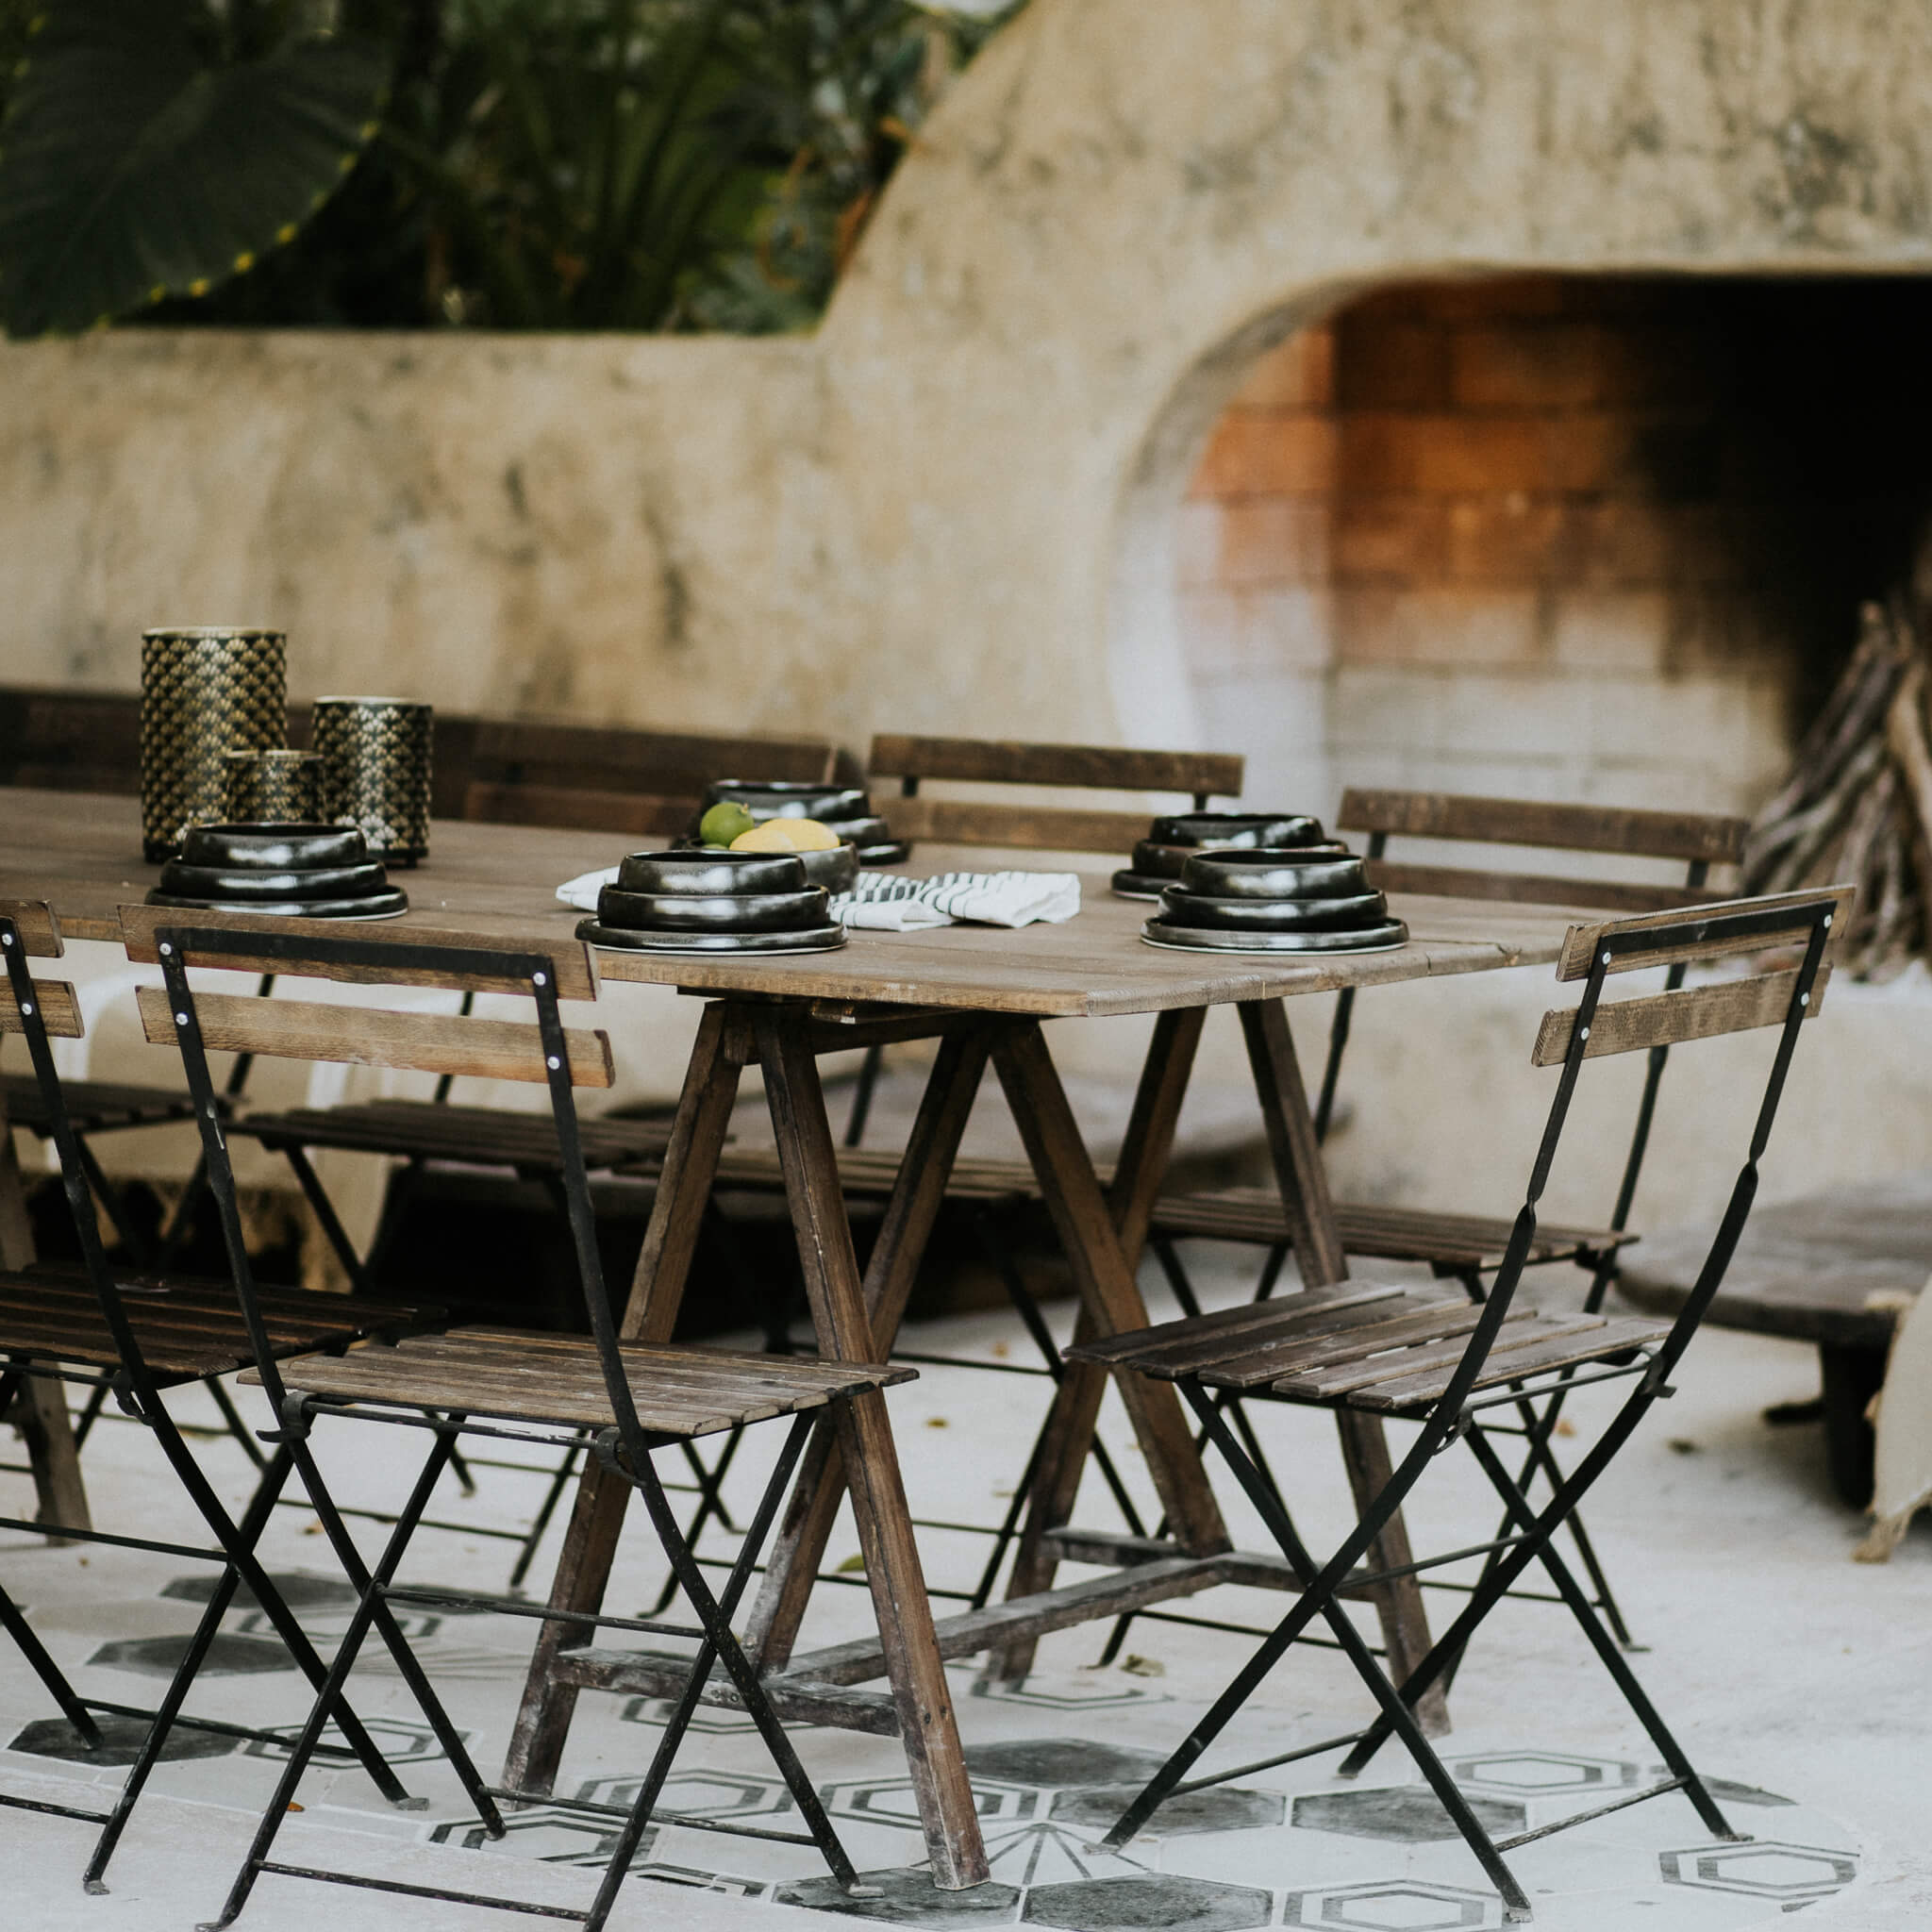 An outdoor table set with black stoneware dishes.